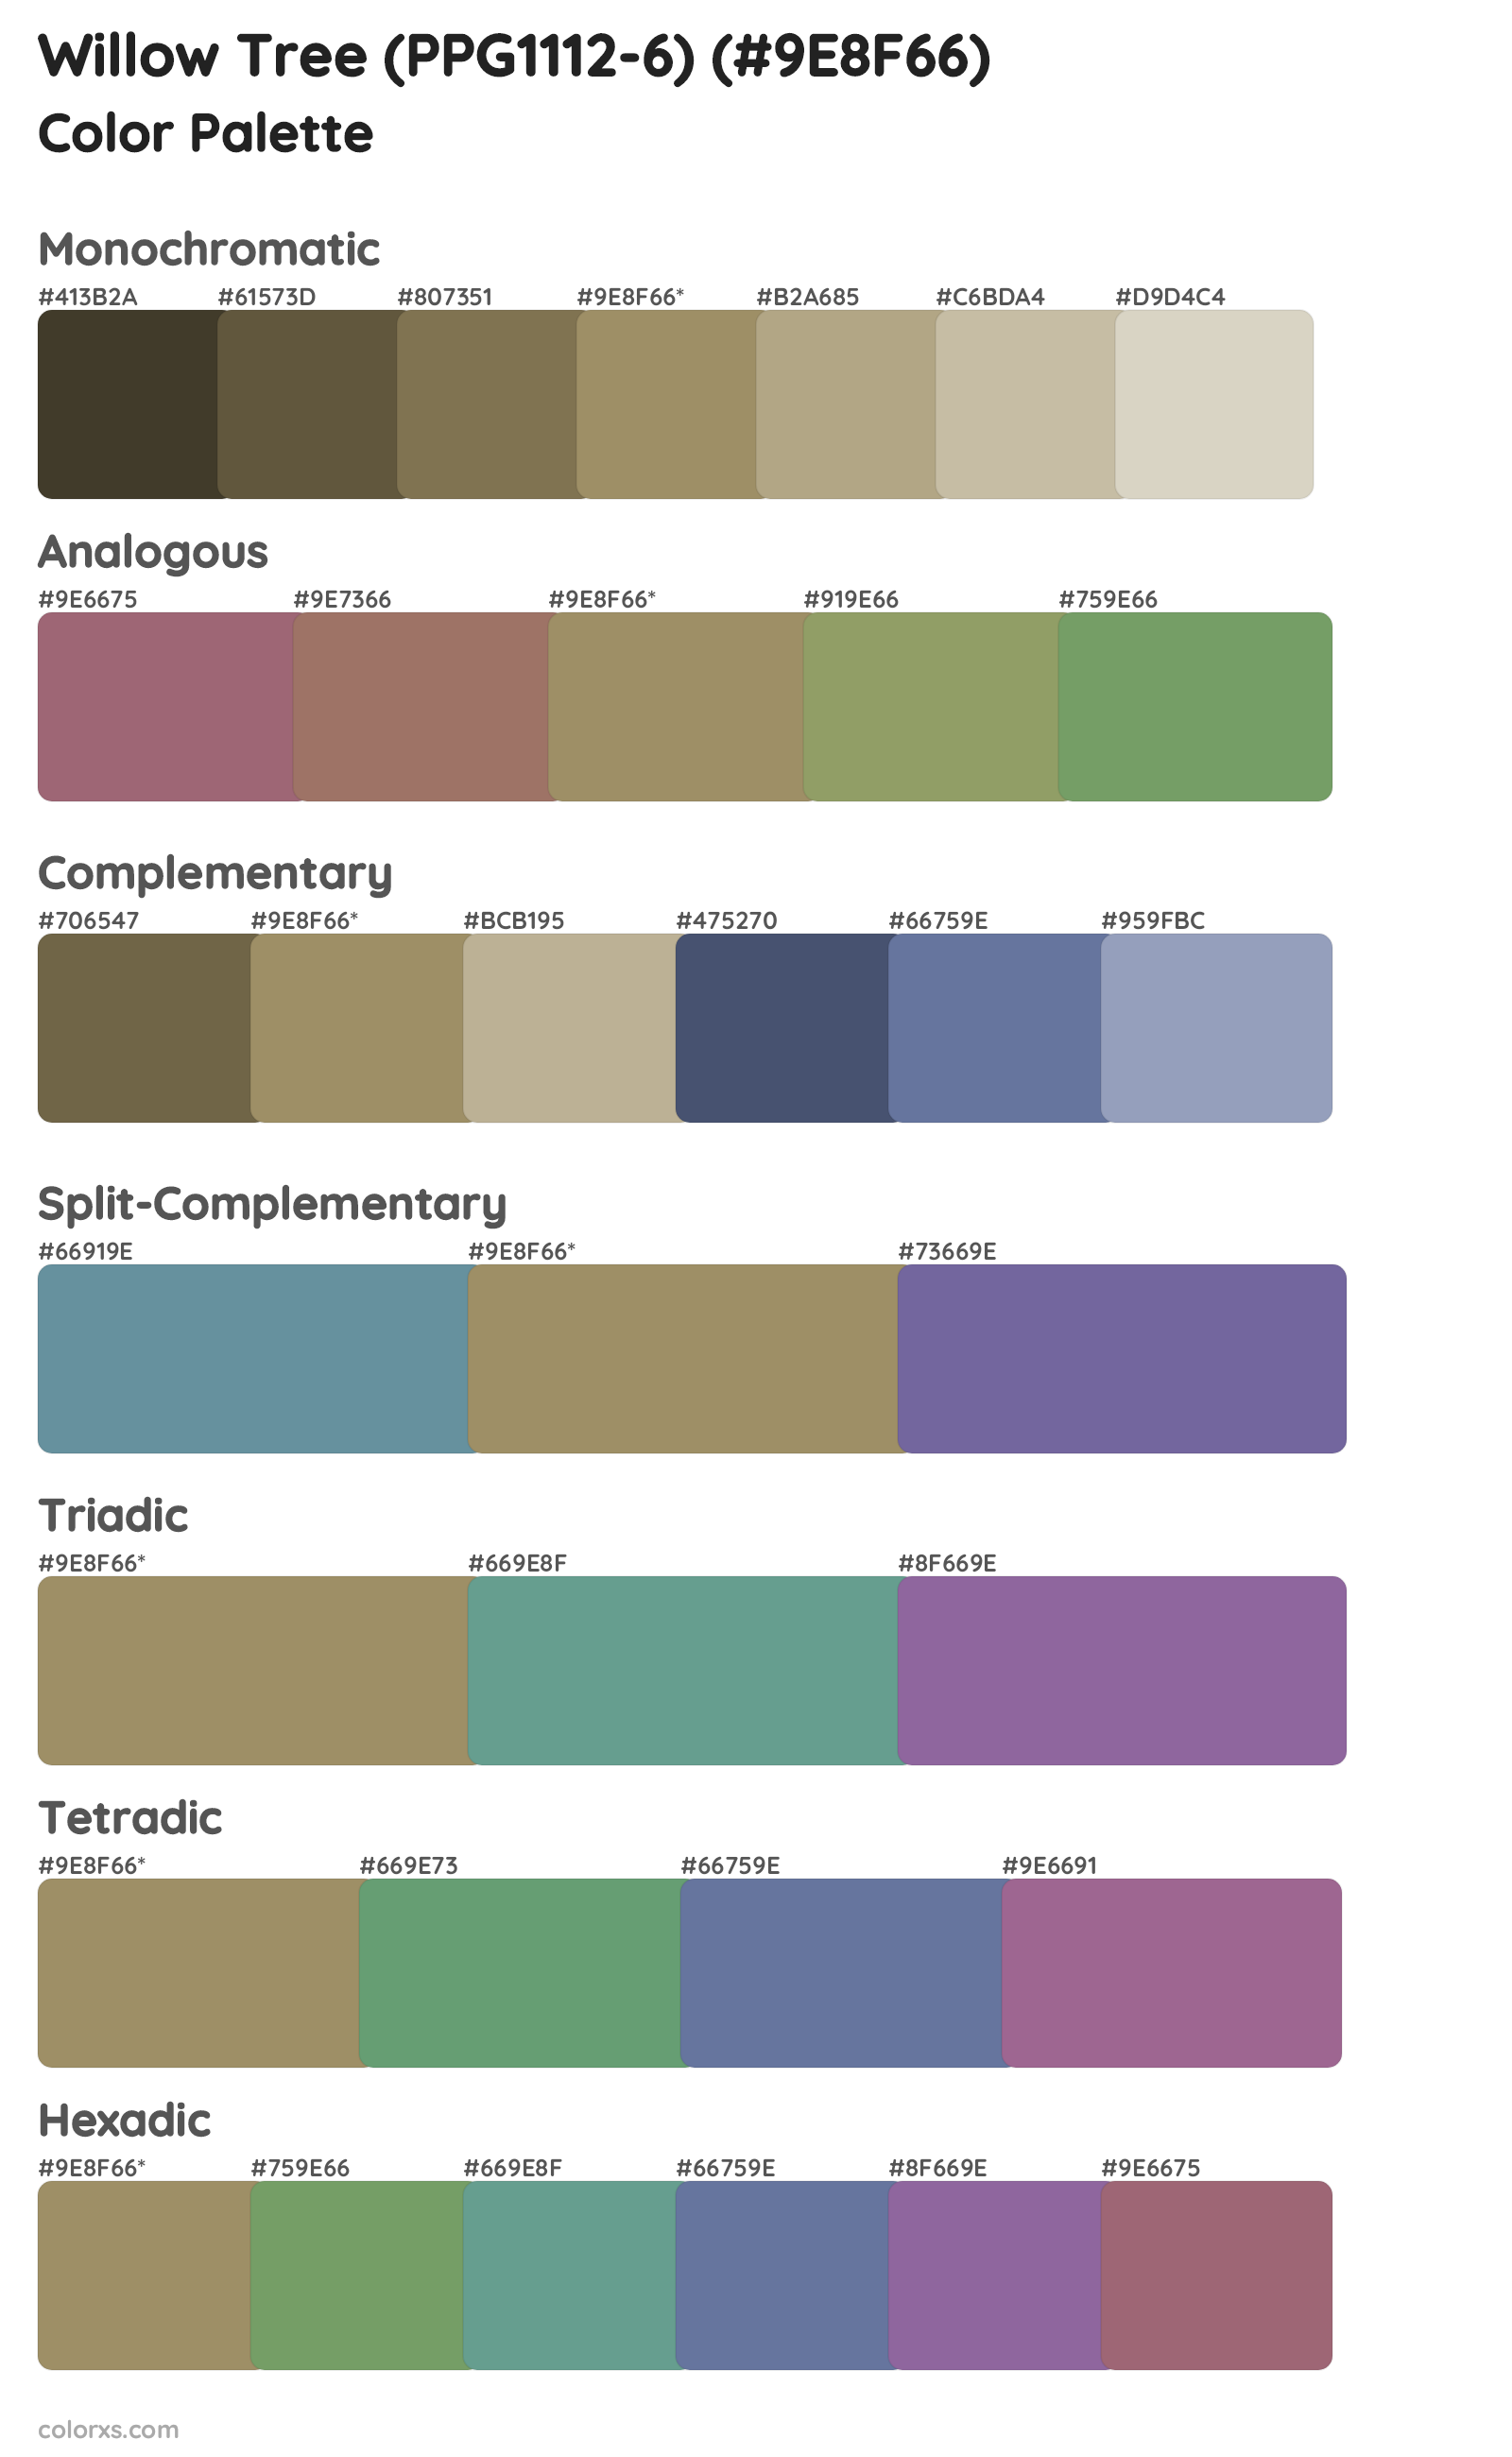 Willow Tree (PPG1112-6) Color Scheme Palettes